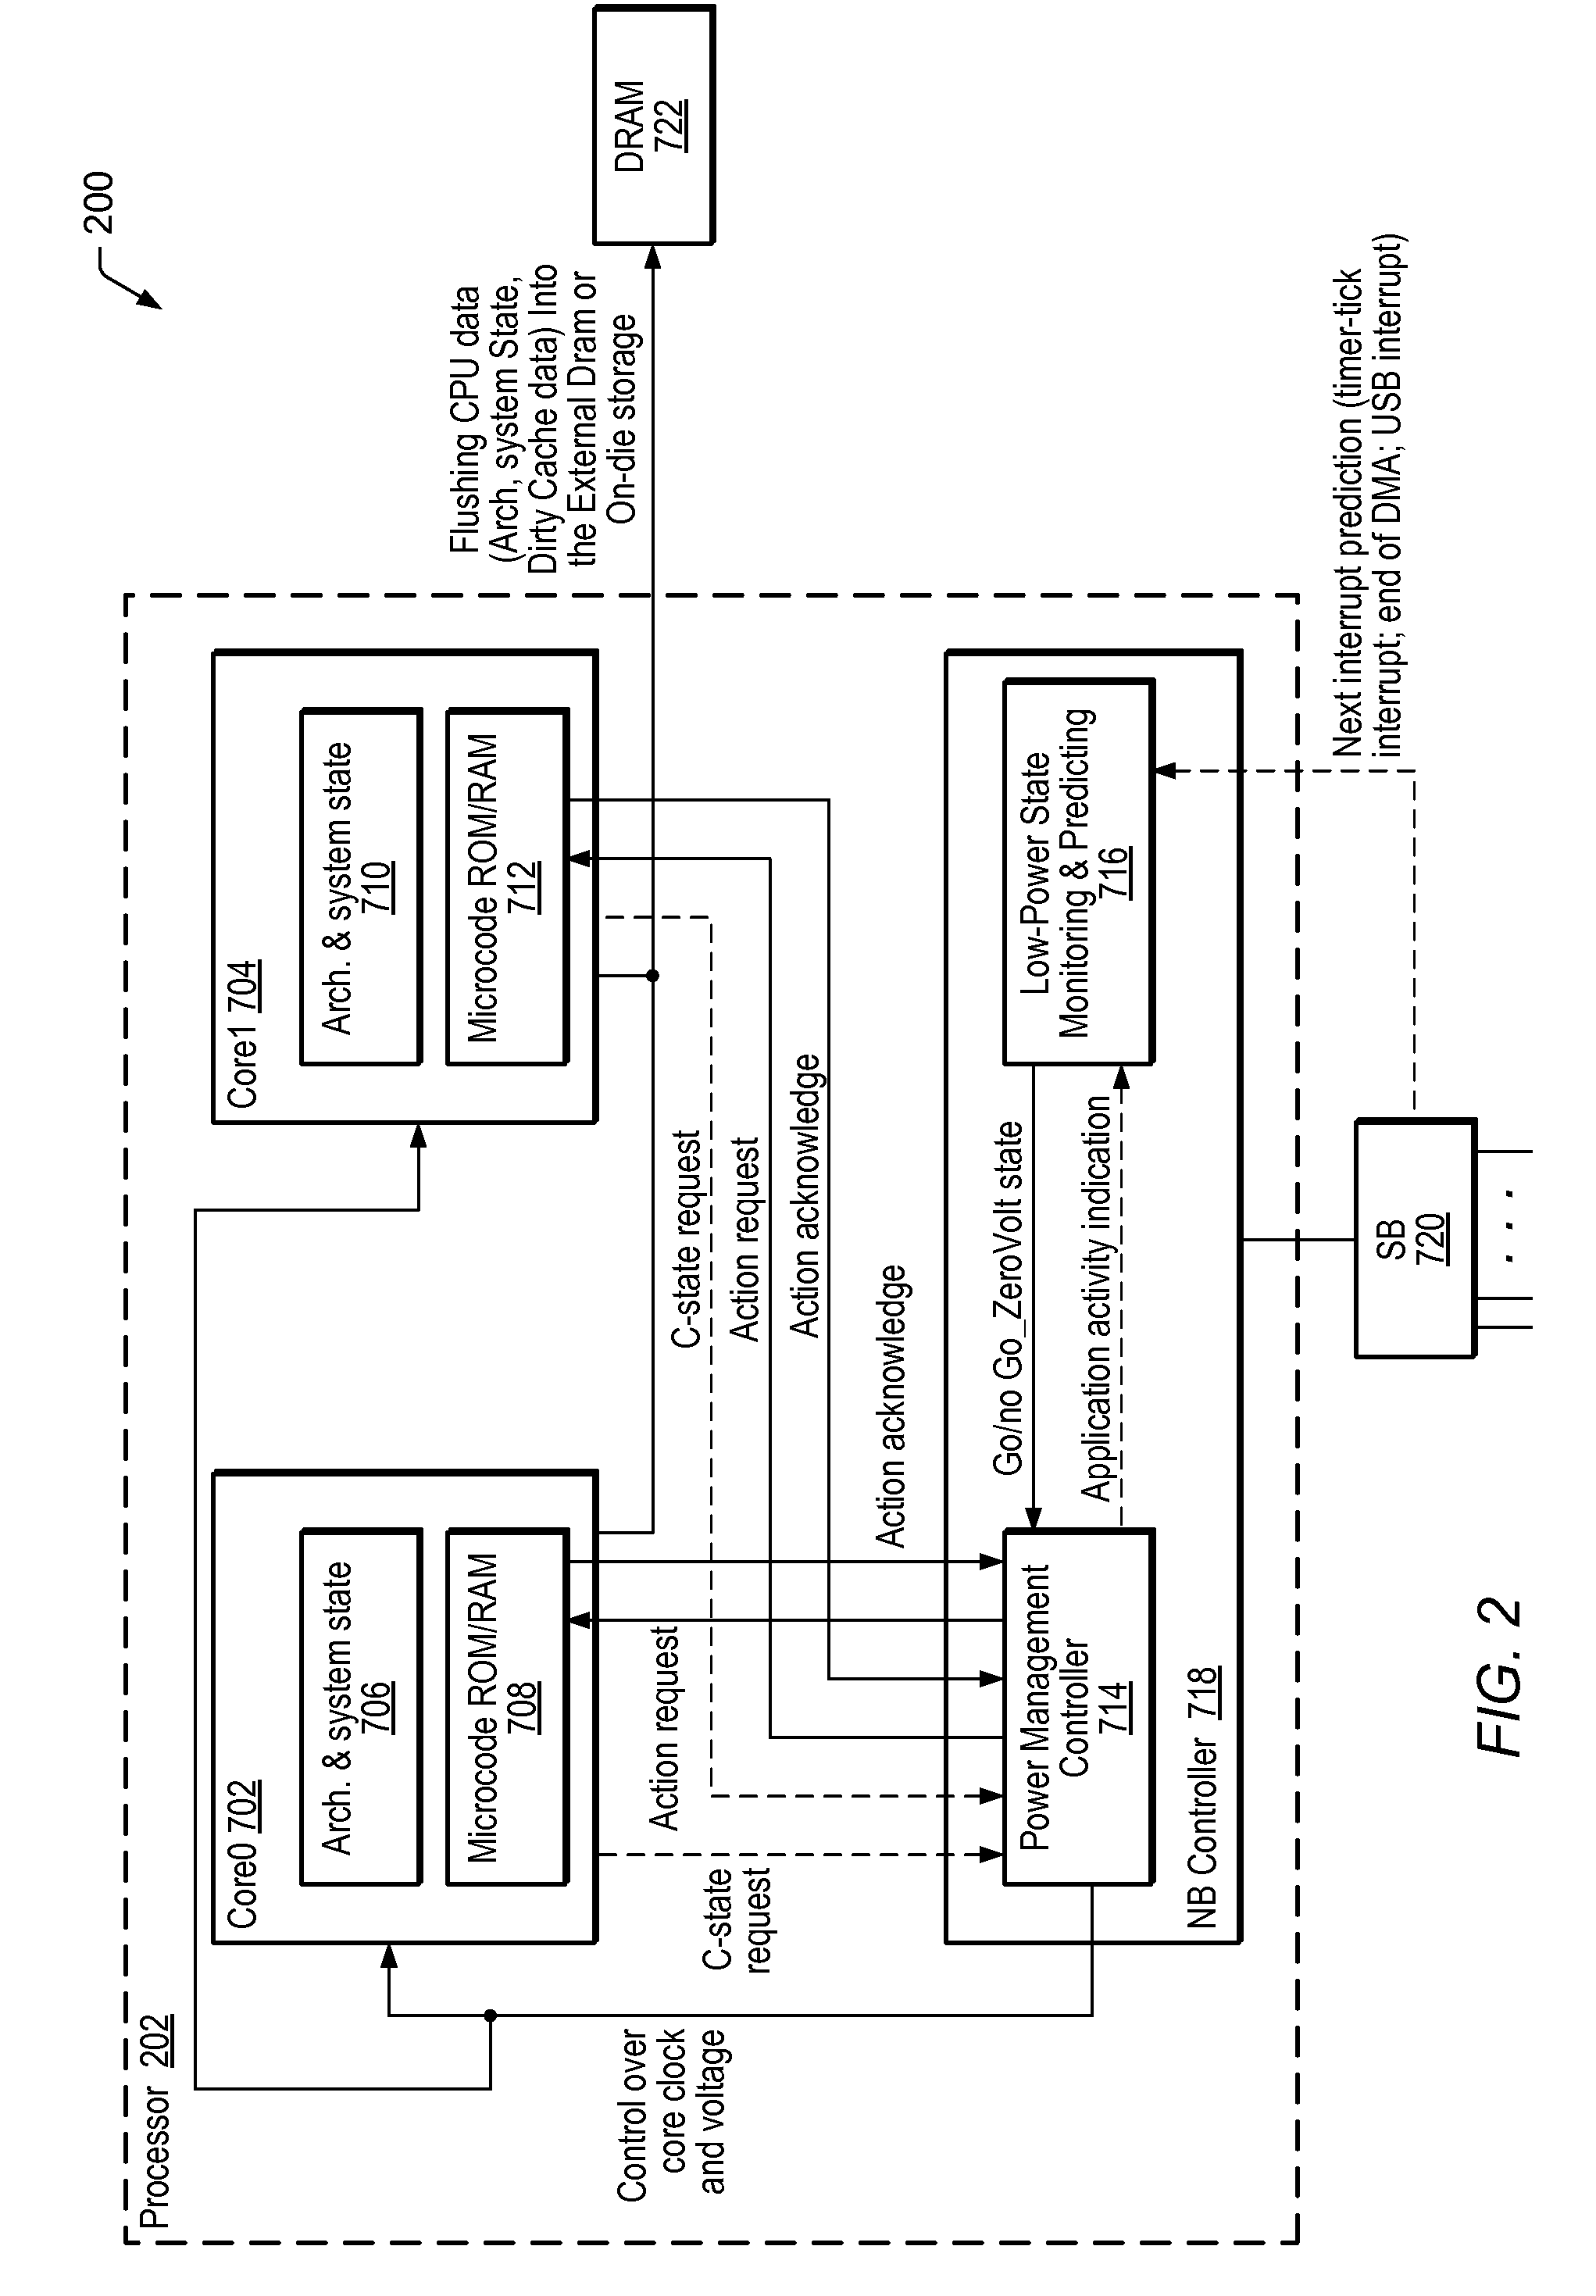 Hardware Monitoring and Decision Making for Transitioning In and Out of Low-Power State